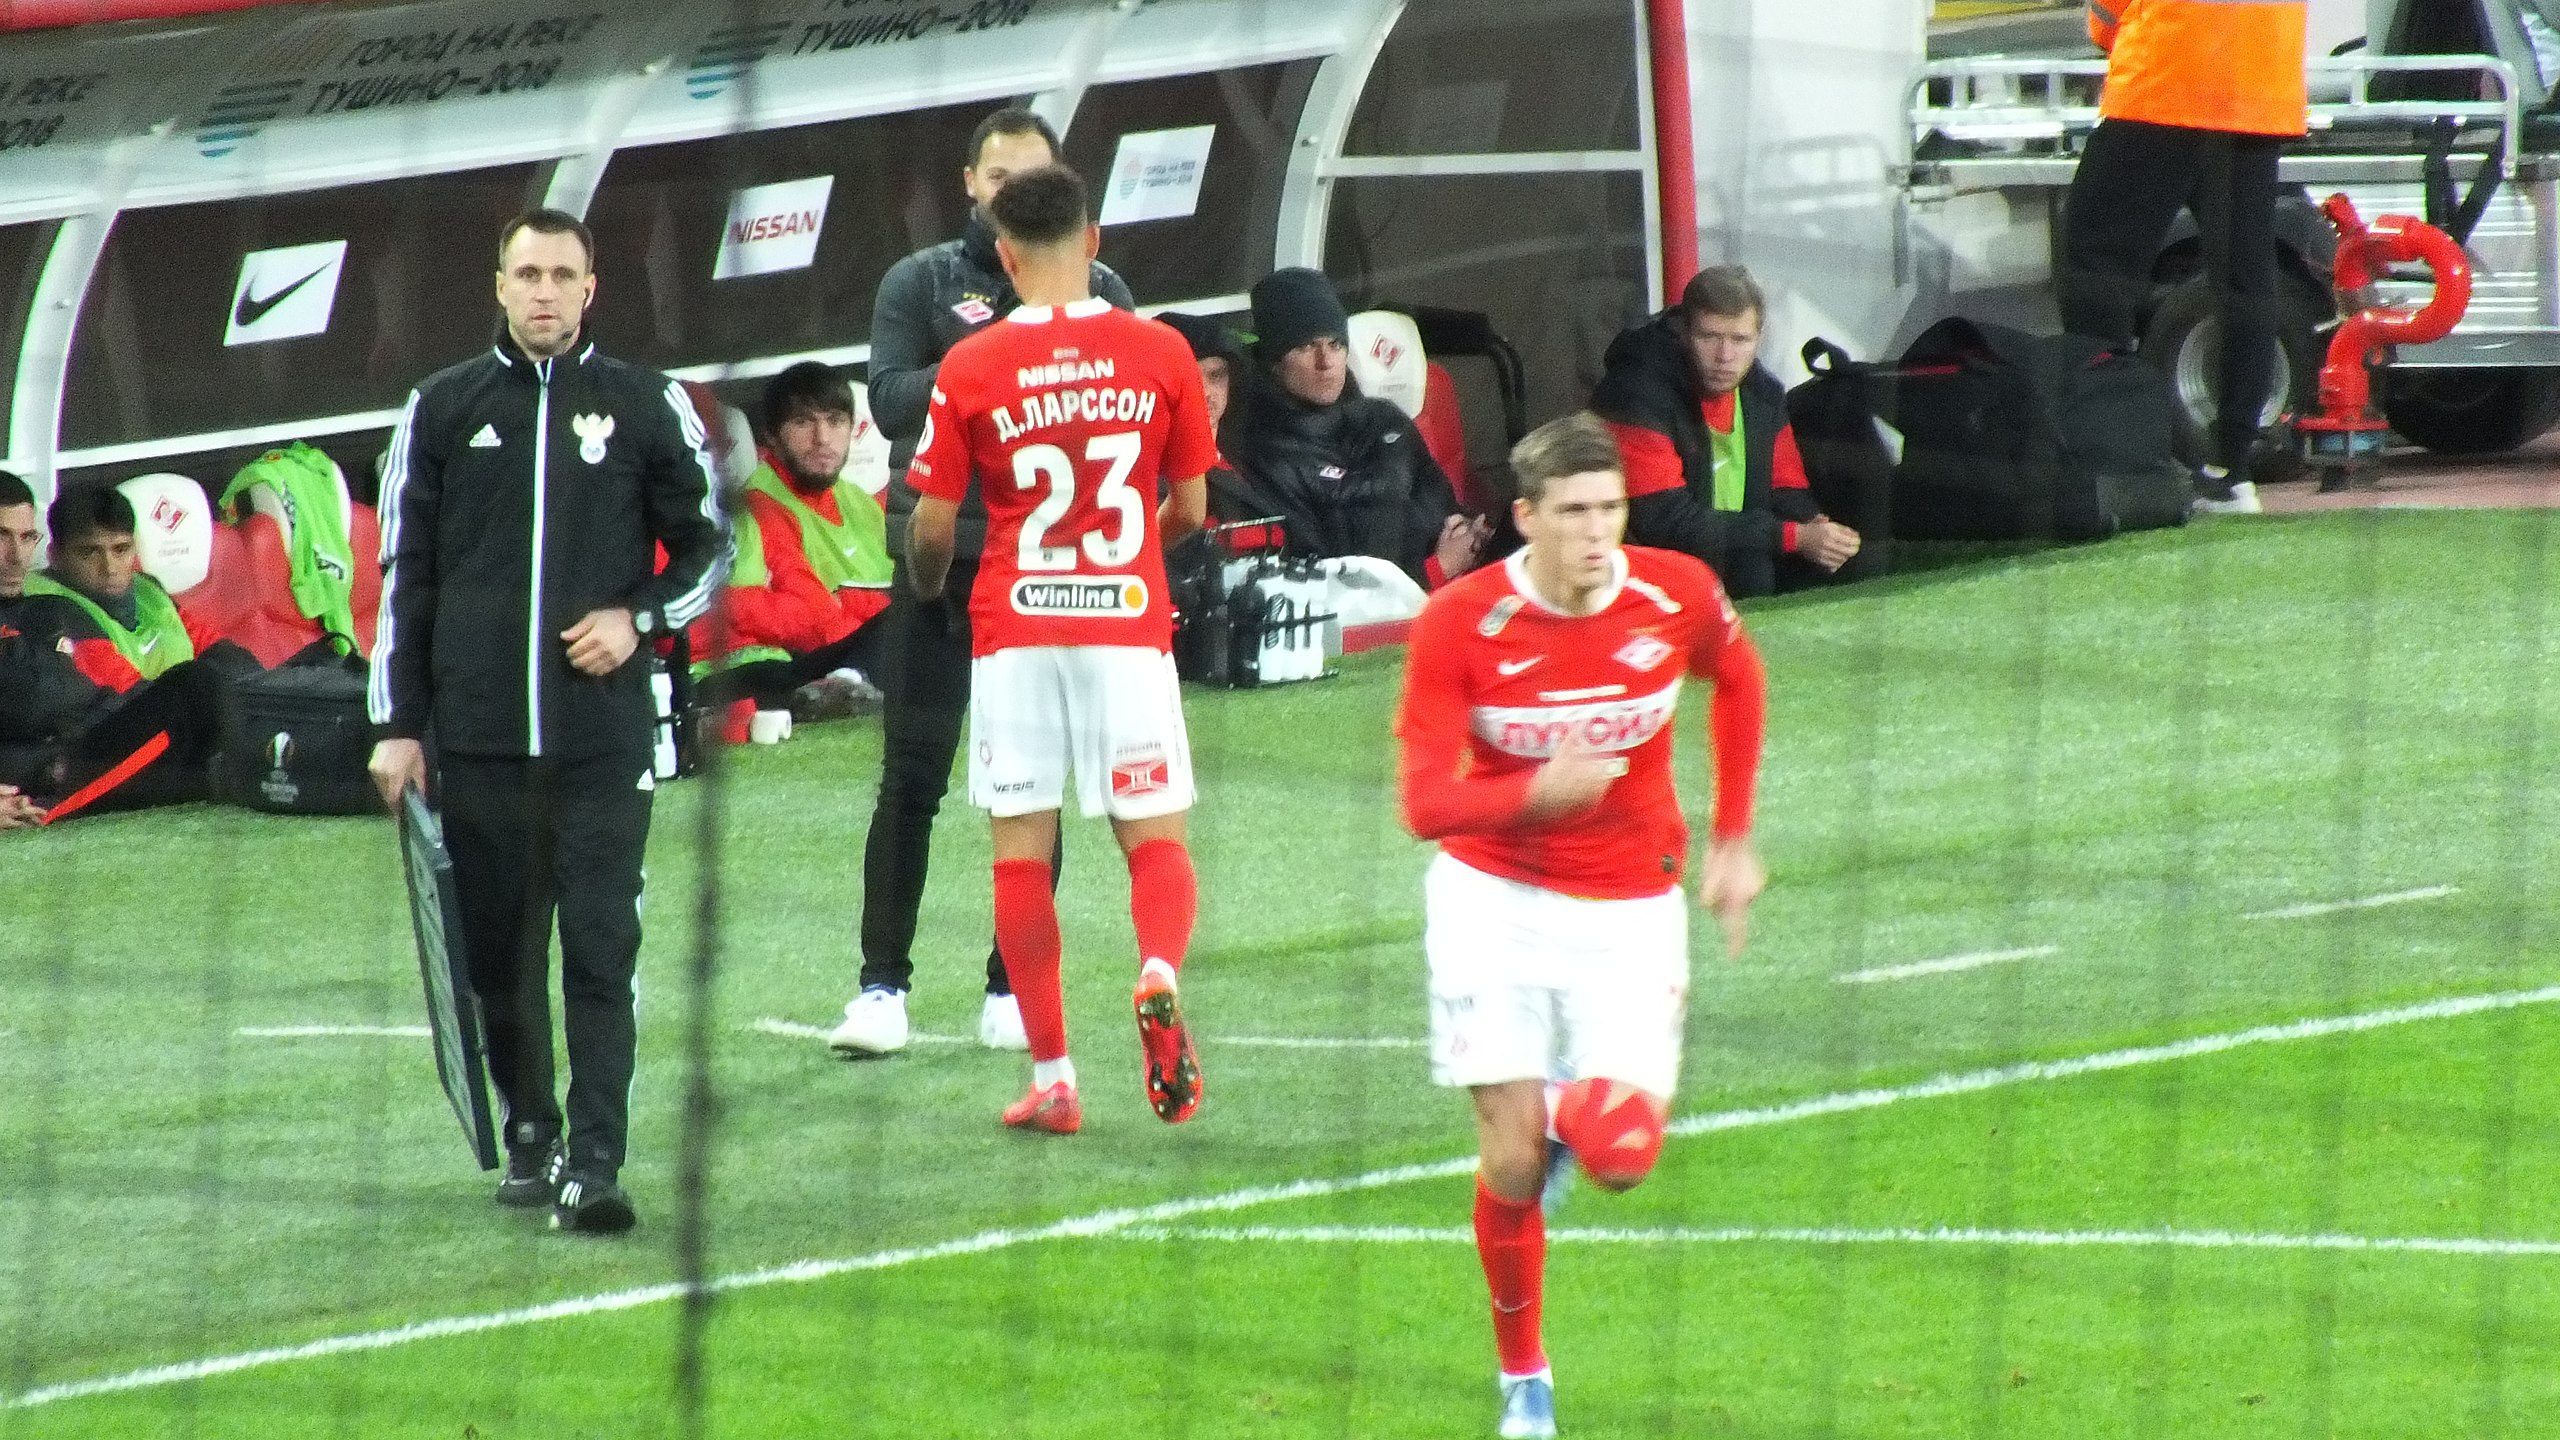 File:FC Spartak Moscow players 2019.jpg - Wikimedia Commons